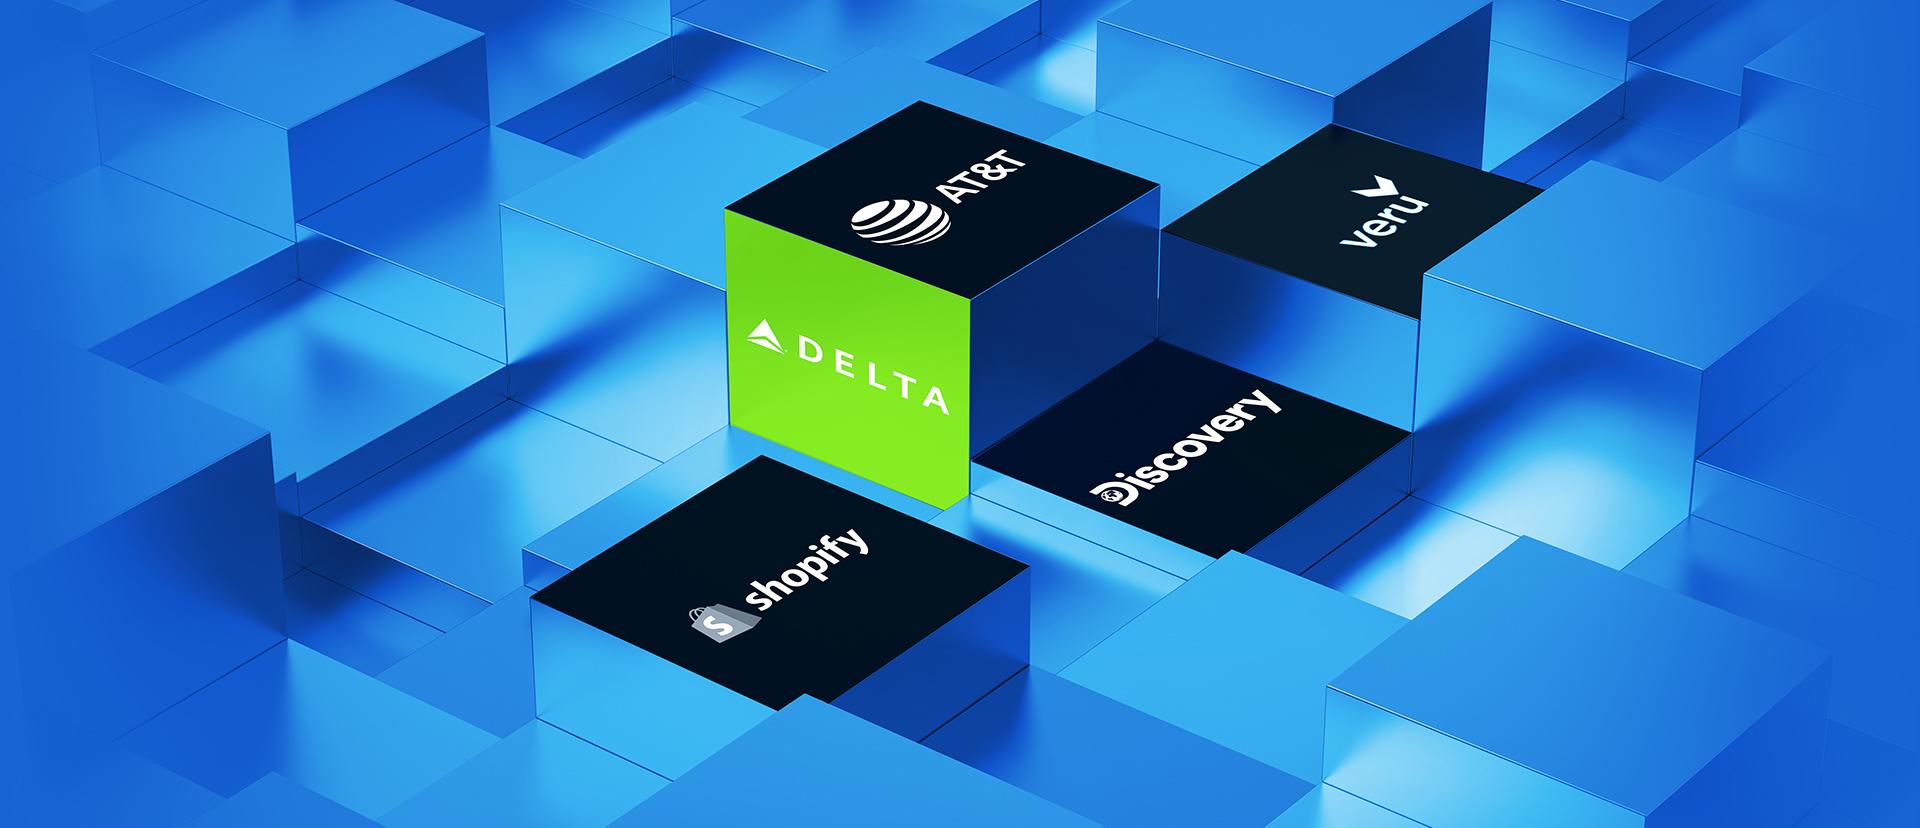 AT&T, Discovery, Veru, Shopify, and Delta Air Lines: Weekly News Digest (11 – 15 April)